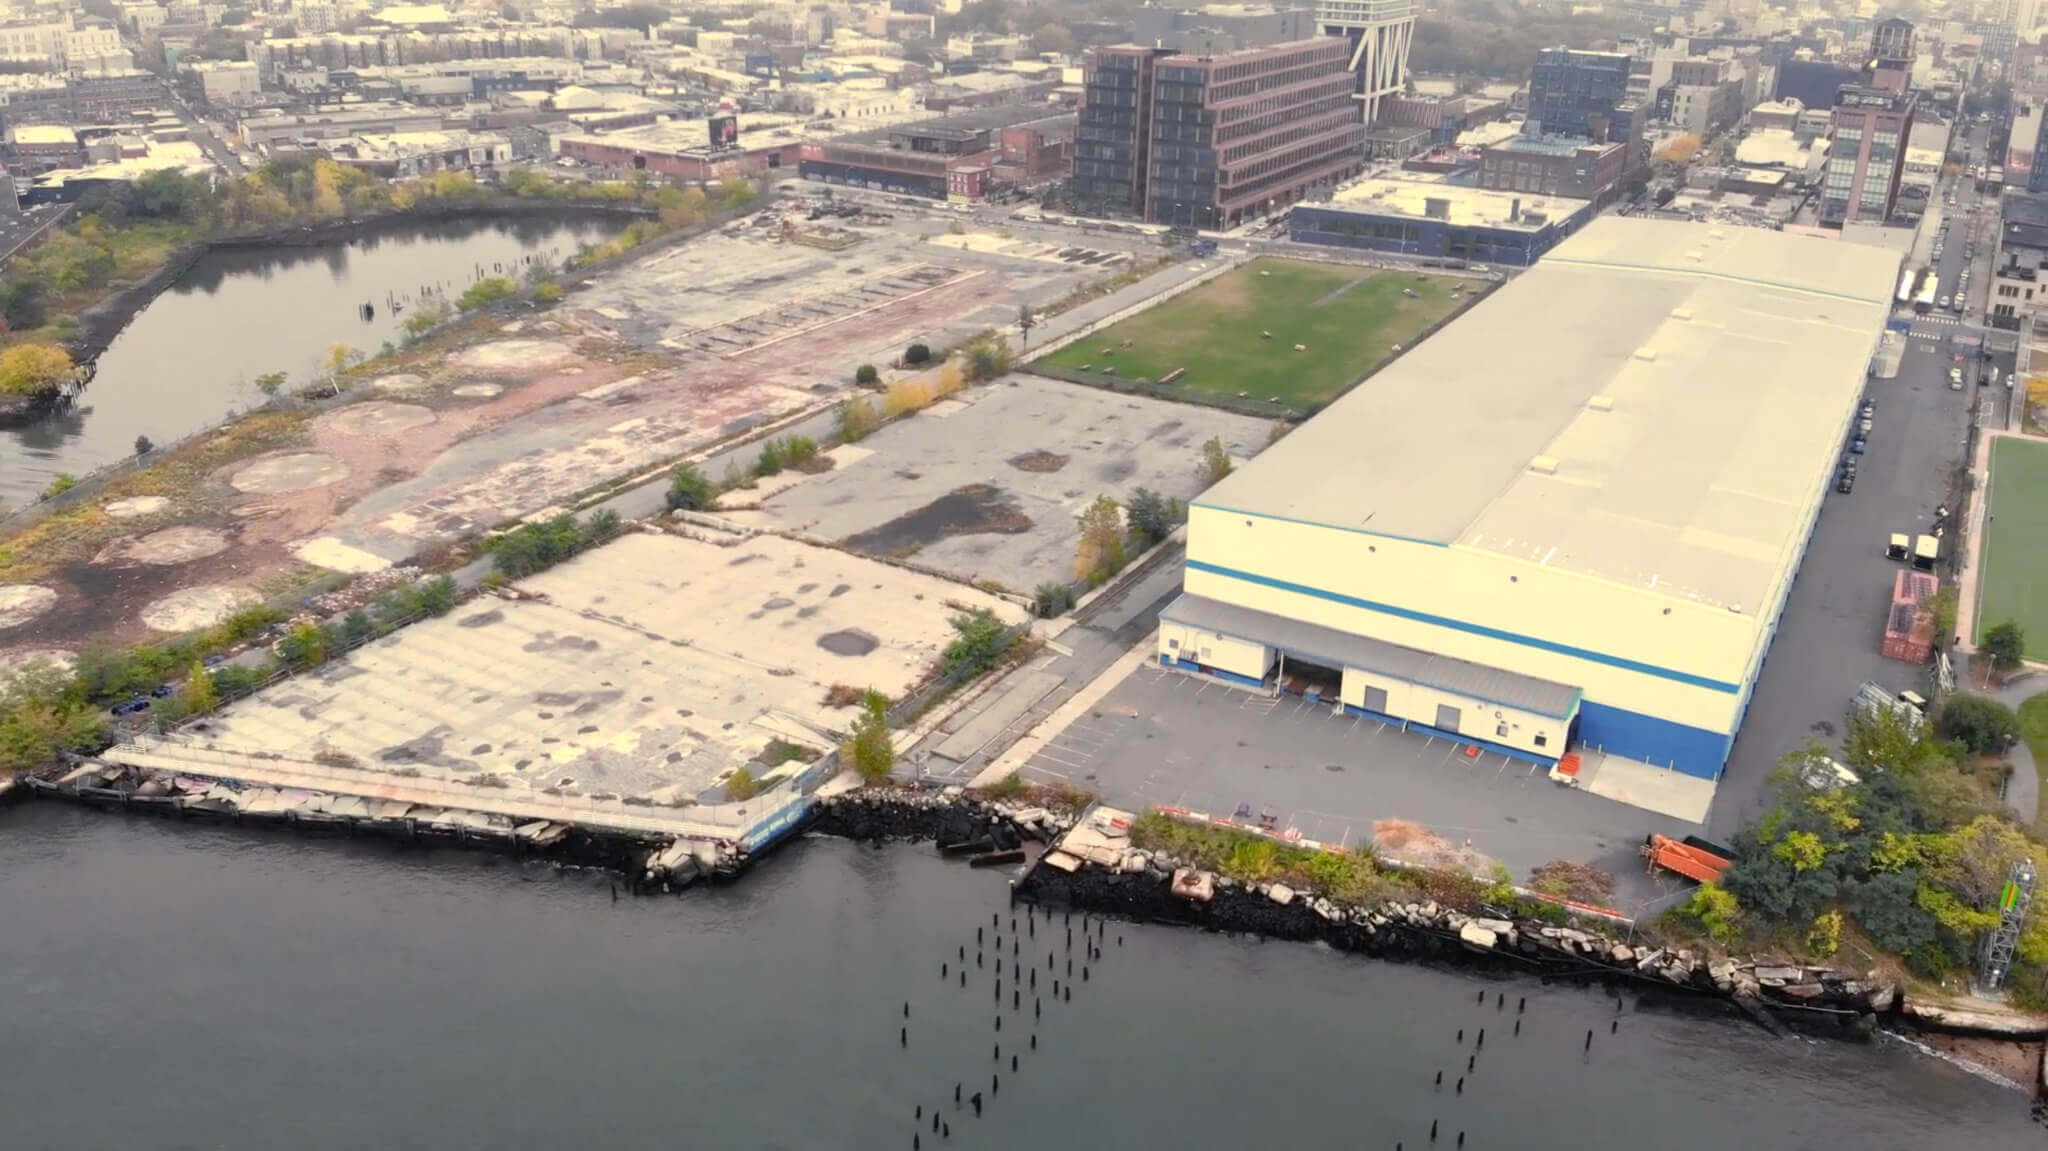 The Bayside lot south of the inlet and CitiStorage warehouse and waterfront property have yet to get any funding for cleanup and development into the remaining parcels of Bushwick Inlet Park